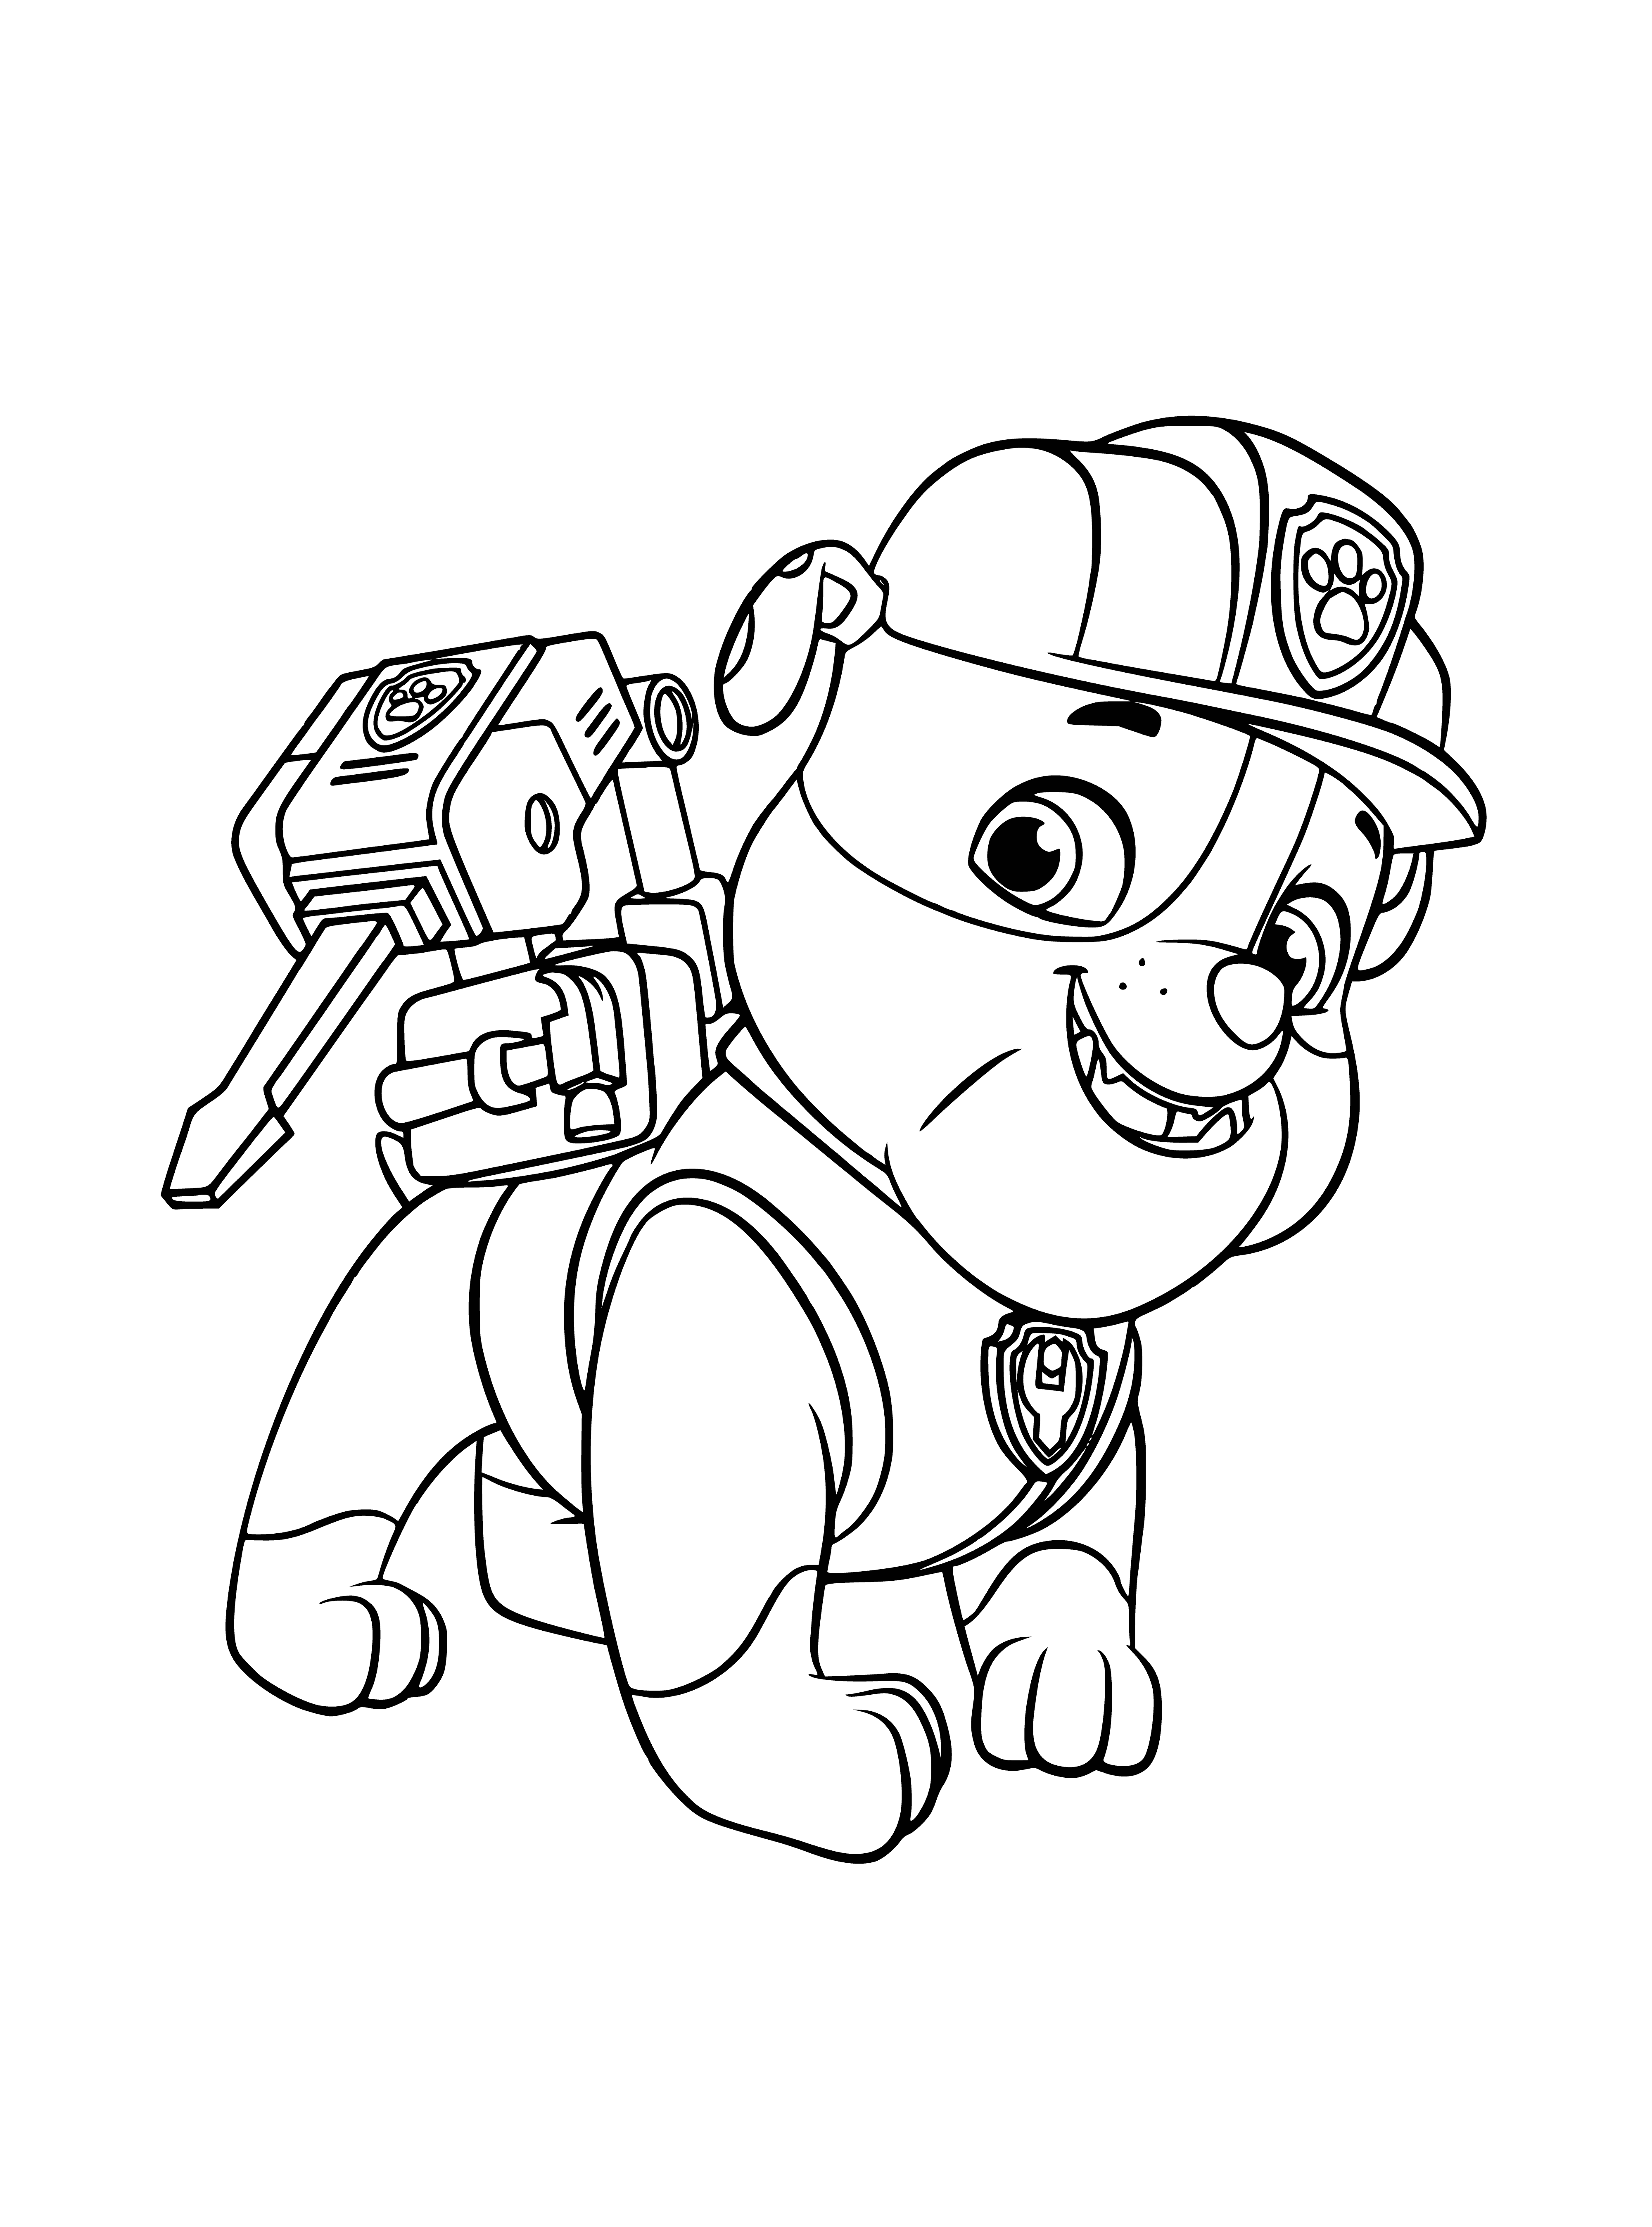 coloring page: Dog in red & yellow outfit w/ number 10 on front is operating jackhammer next to a colorful page. Mouth open wide as if ready to start.